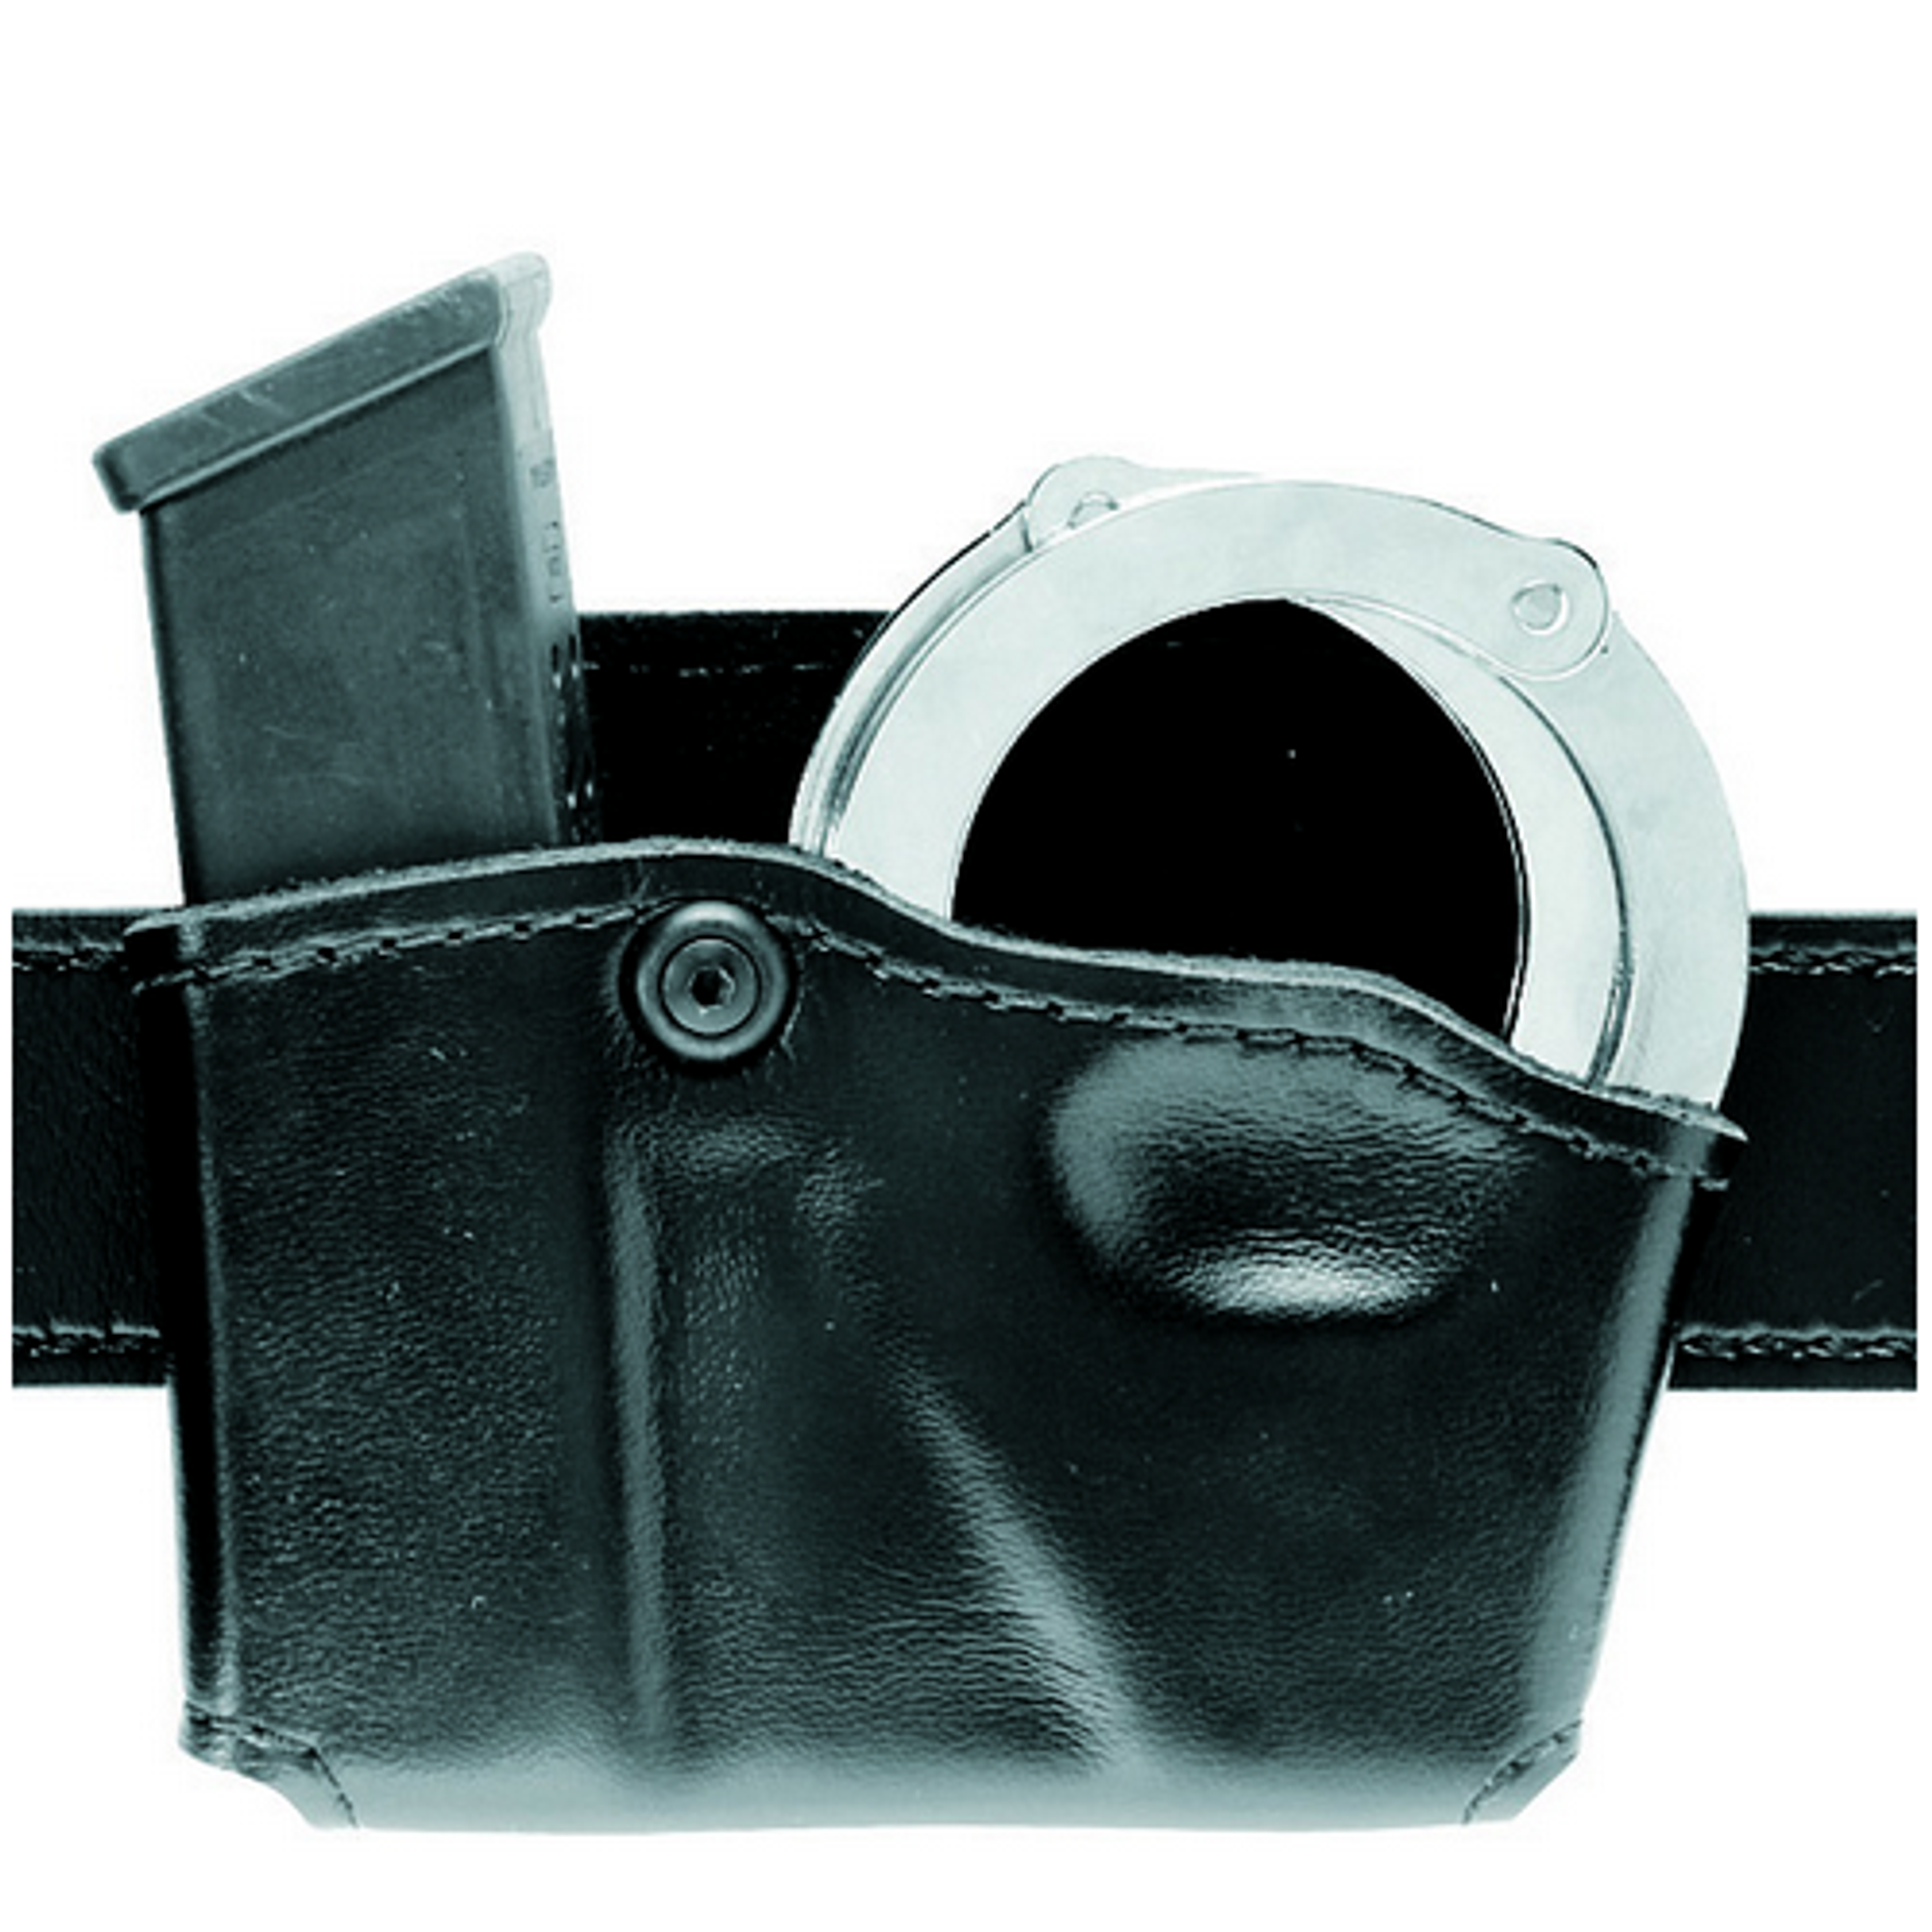 Model 573 Open Top Magazine And Handcuff Pouch - KR573-383-412